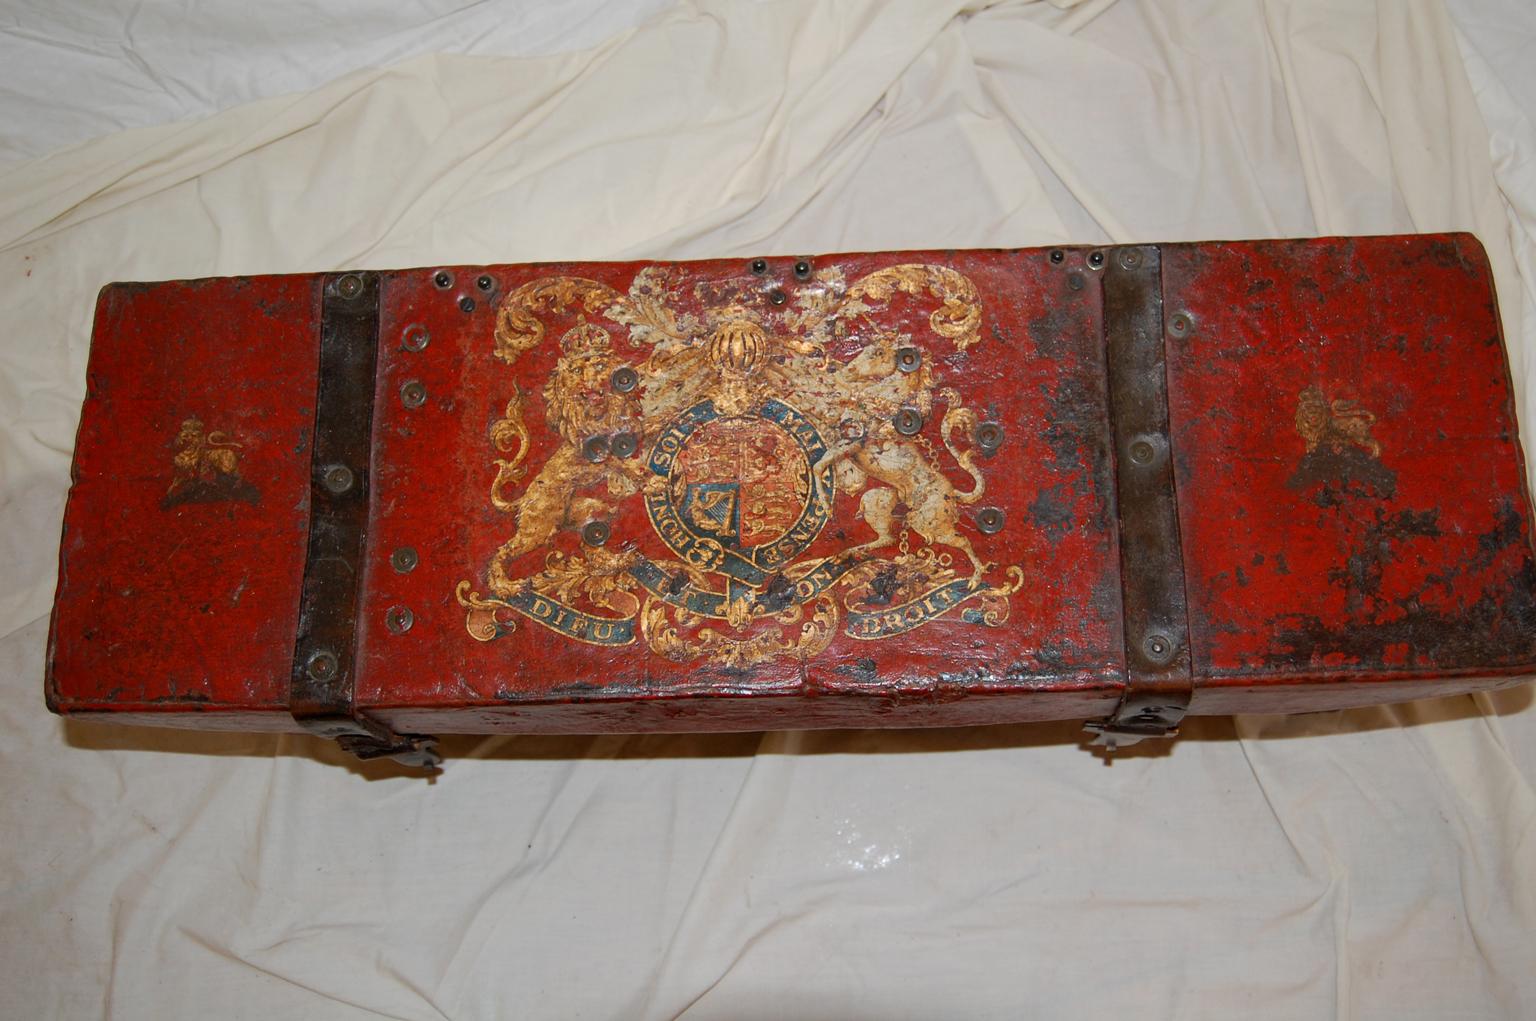 English military munitions box of thick full cowhide leather over cork with painted royal coat of arms and mottos on the top: 